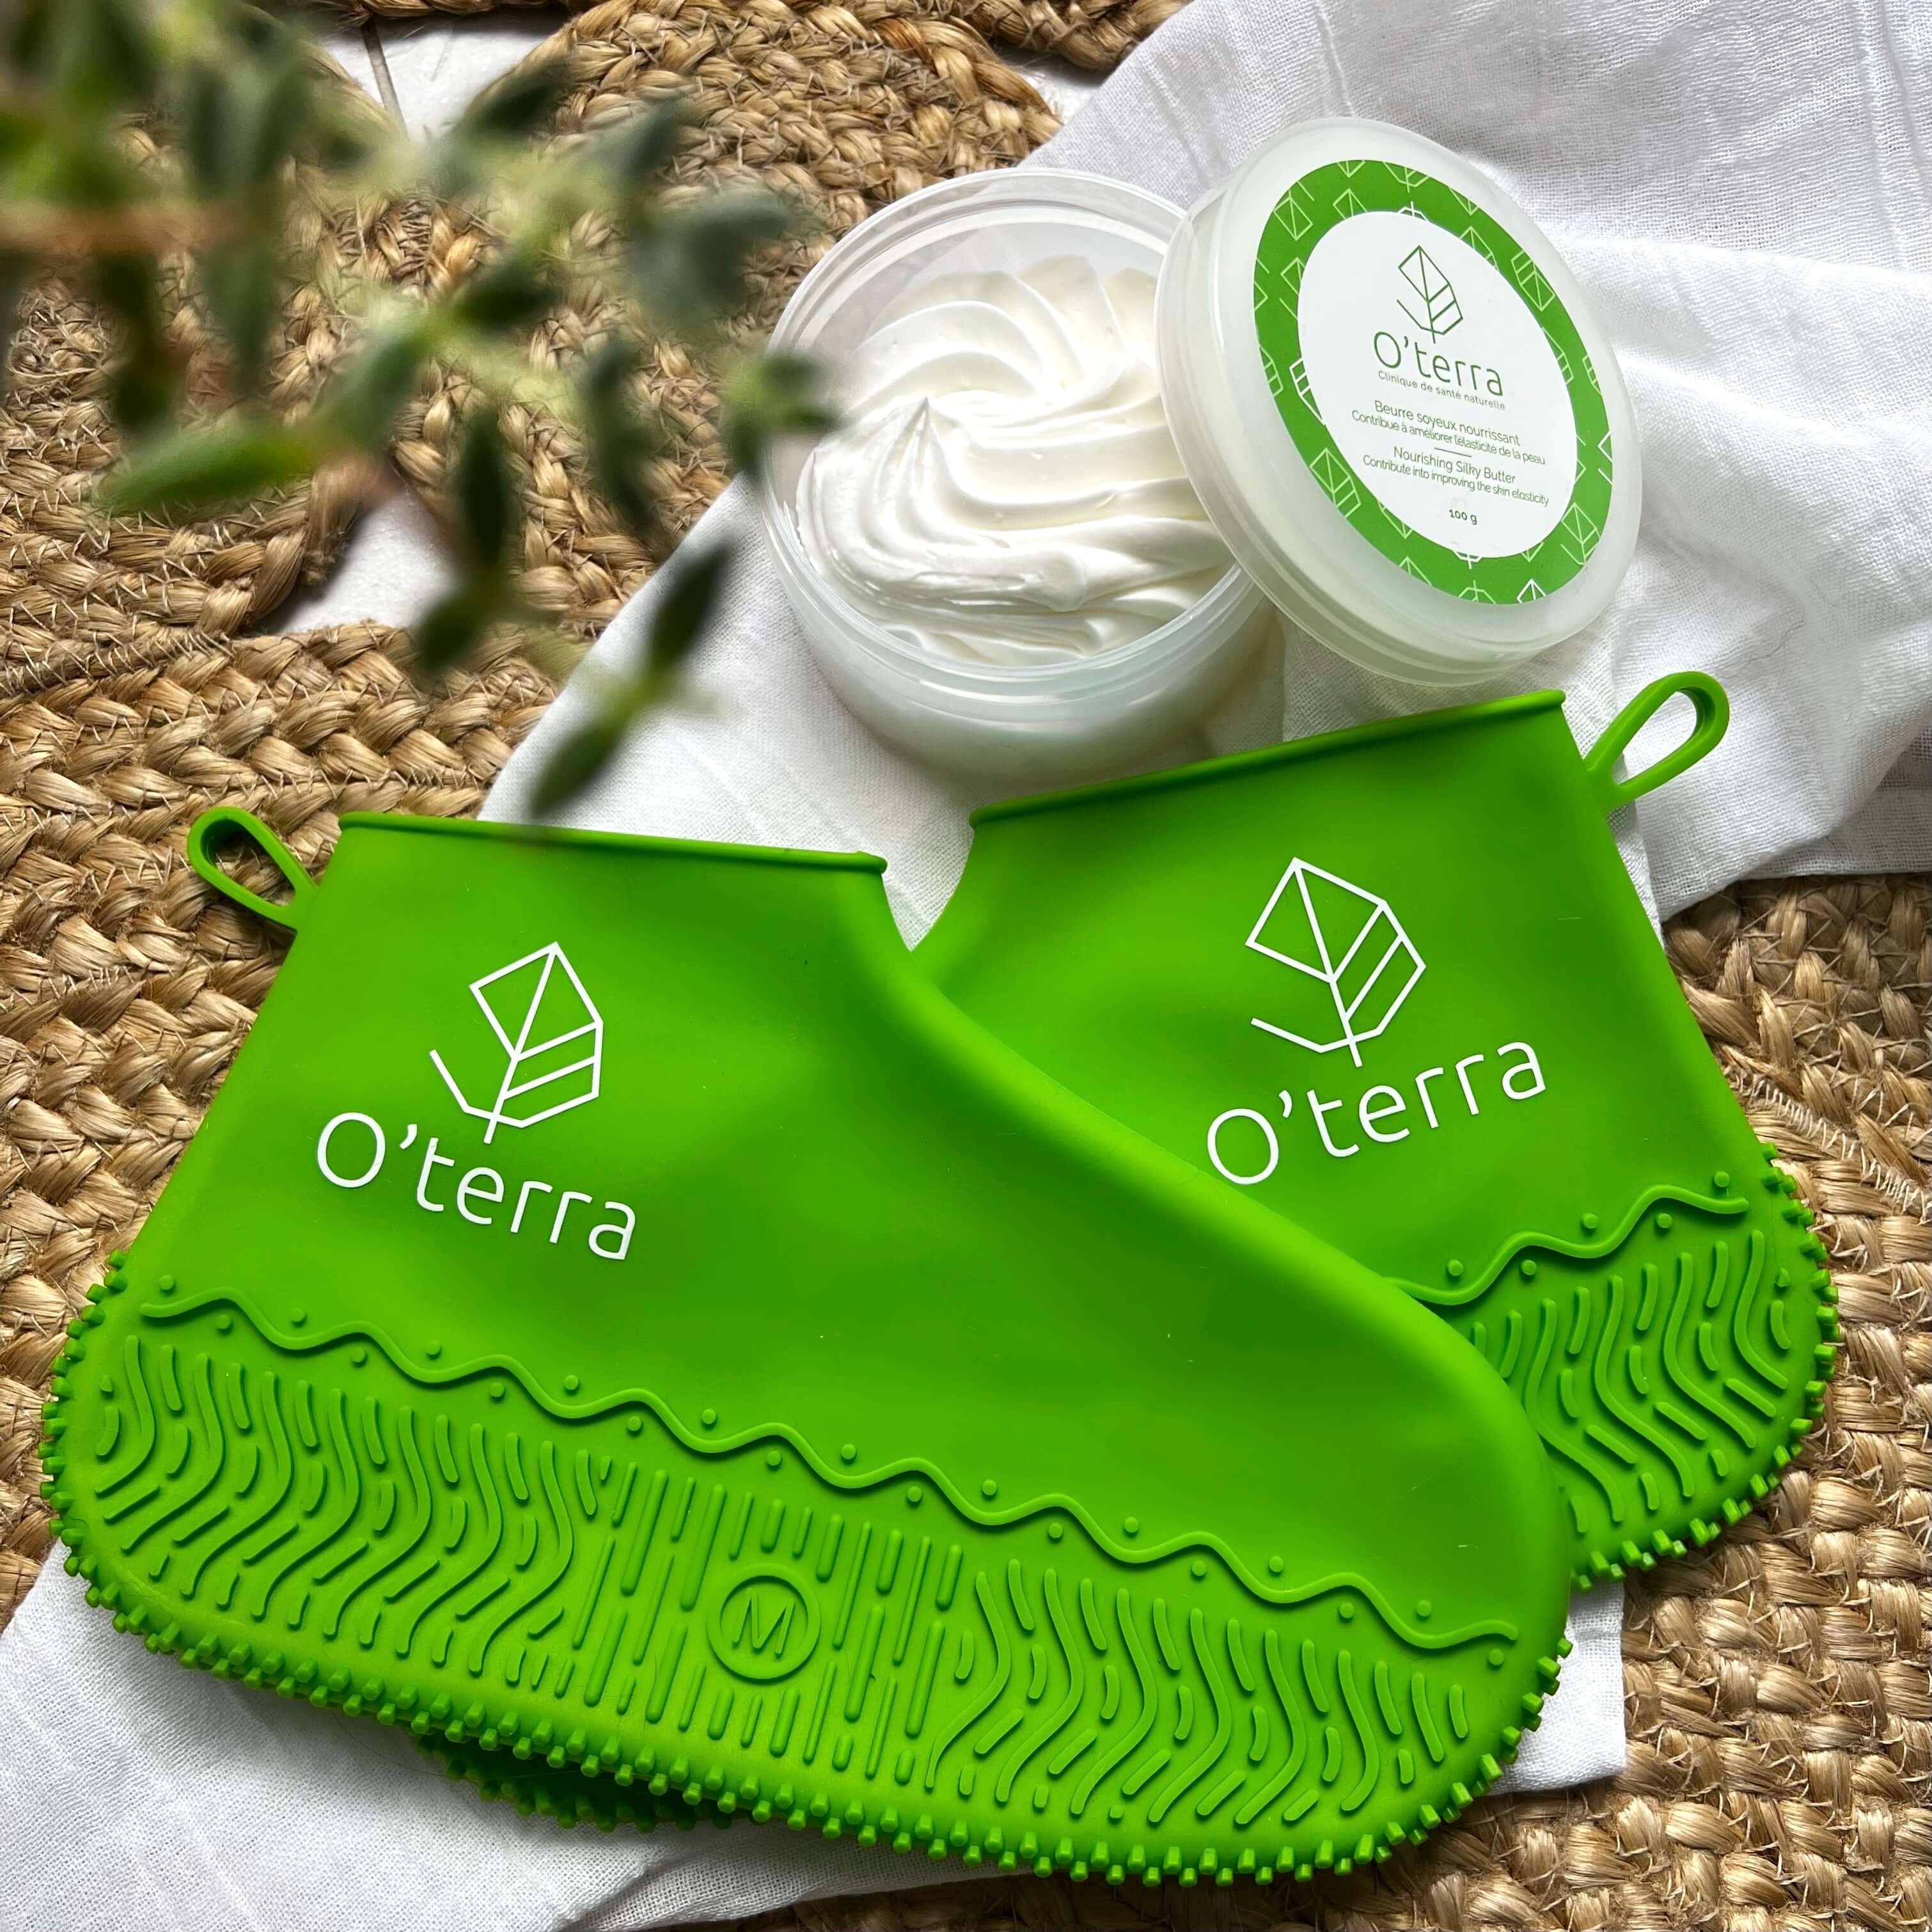 O'terra Foot care slippers & nourishing silky butter  2 items